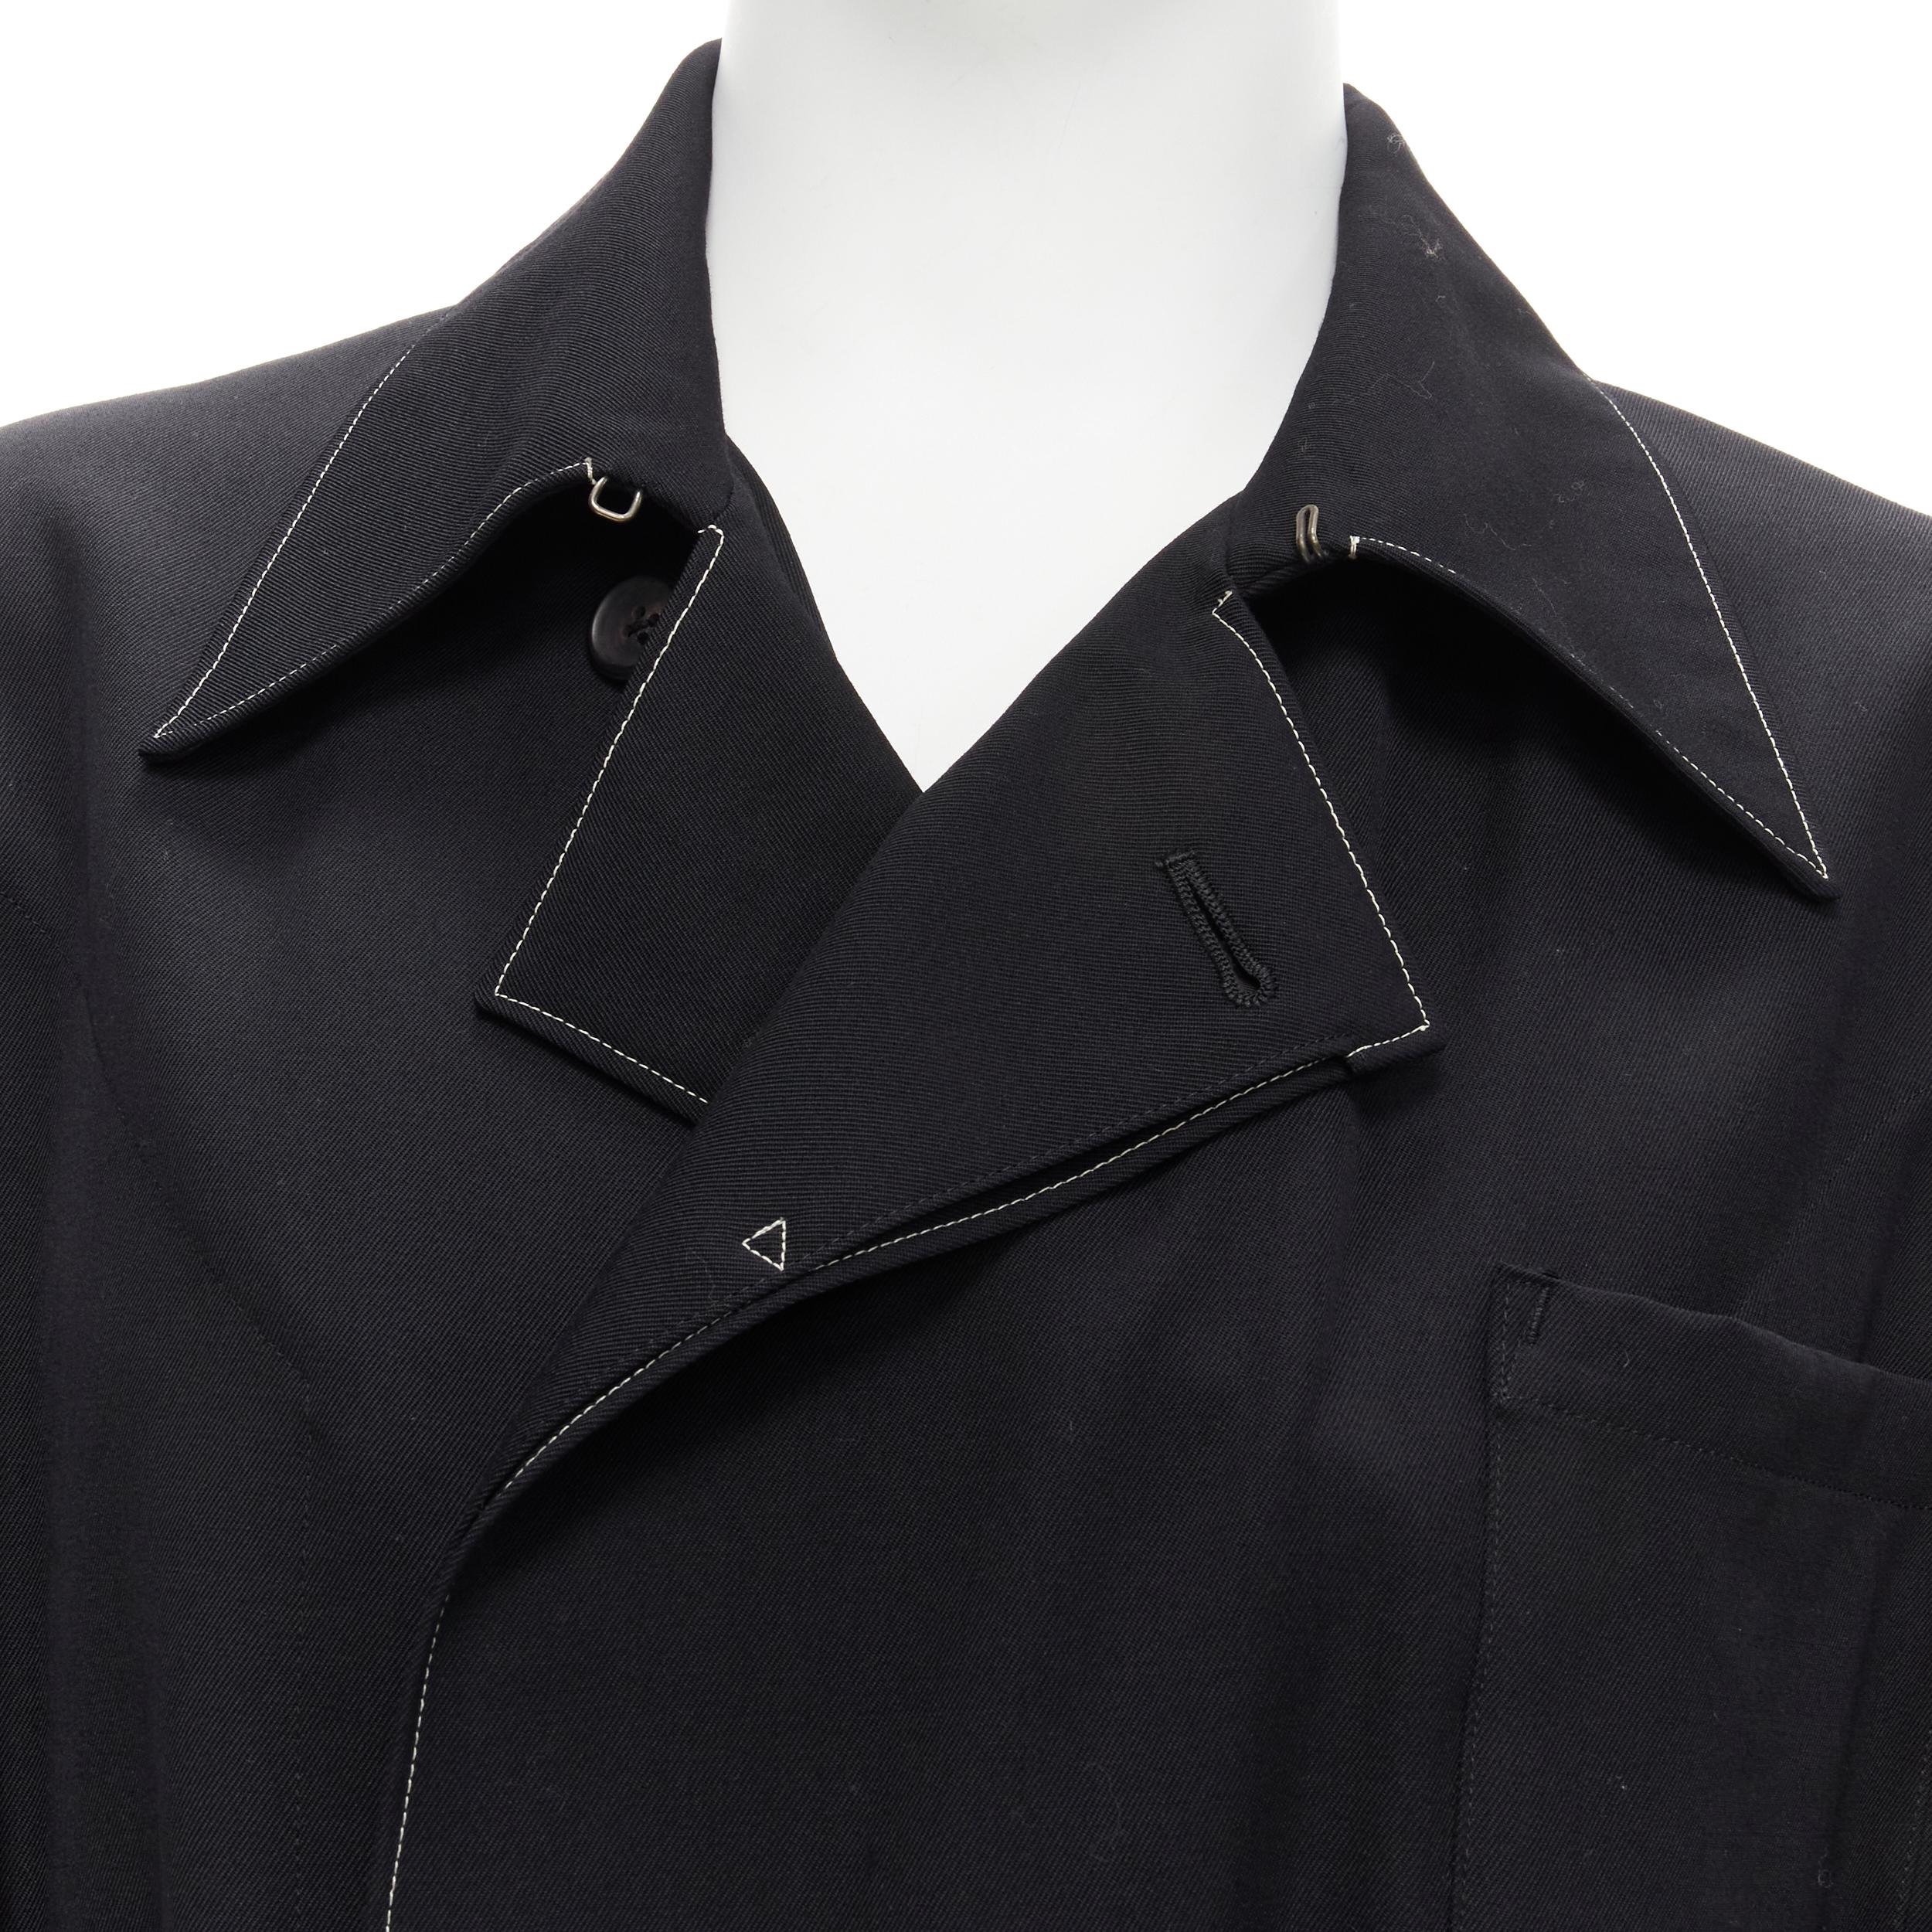 YOHJI YAMAMOTO HOMME Vintage black white topstitched draped belted coat M
Reference: BMPA/A00244
Brand: Yohji Yamamoto
Designer: Yohji Yamamoto
Material: Wool
Color: Black
Pattern: Solid
Closure: Self Tie
Lining: Rayon
Extra Details: 3 pockets at